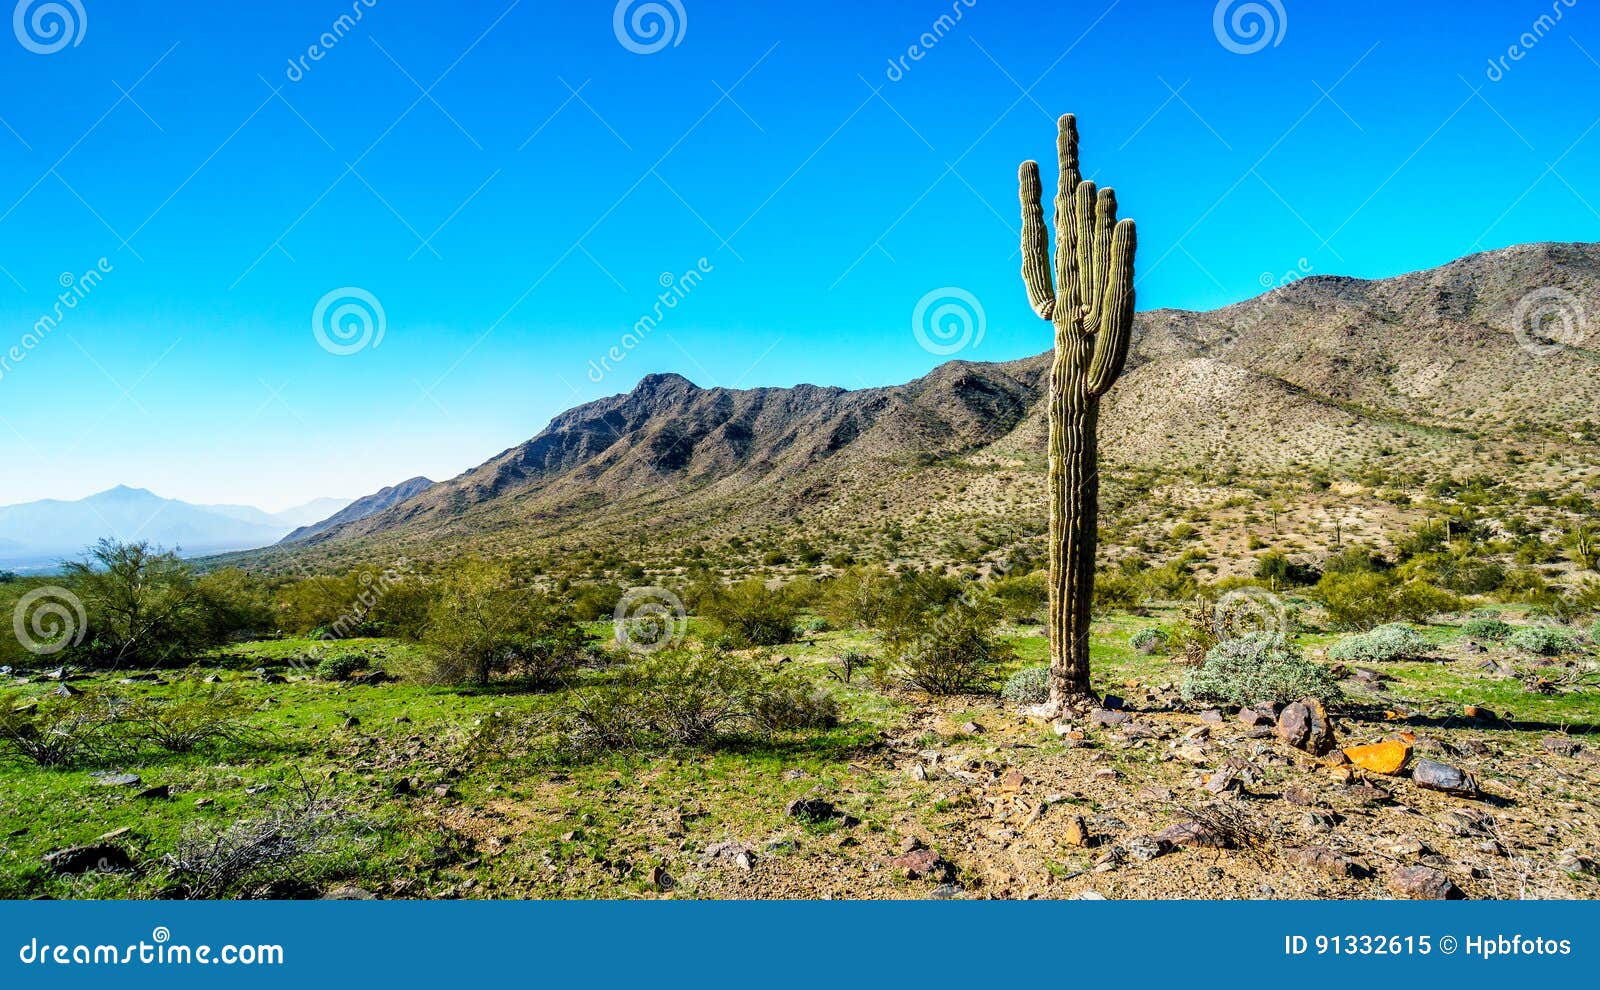 desert landscape with tall saguaro cactus along the bajada hiking trail in the mountains of south mountain park